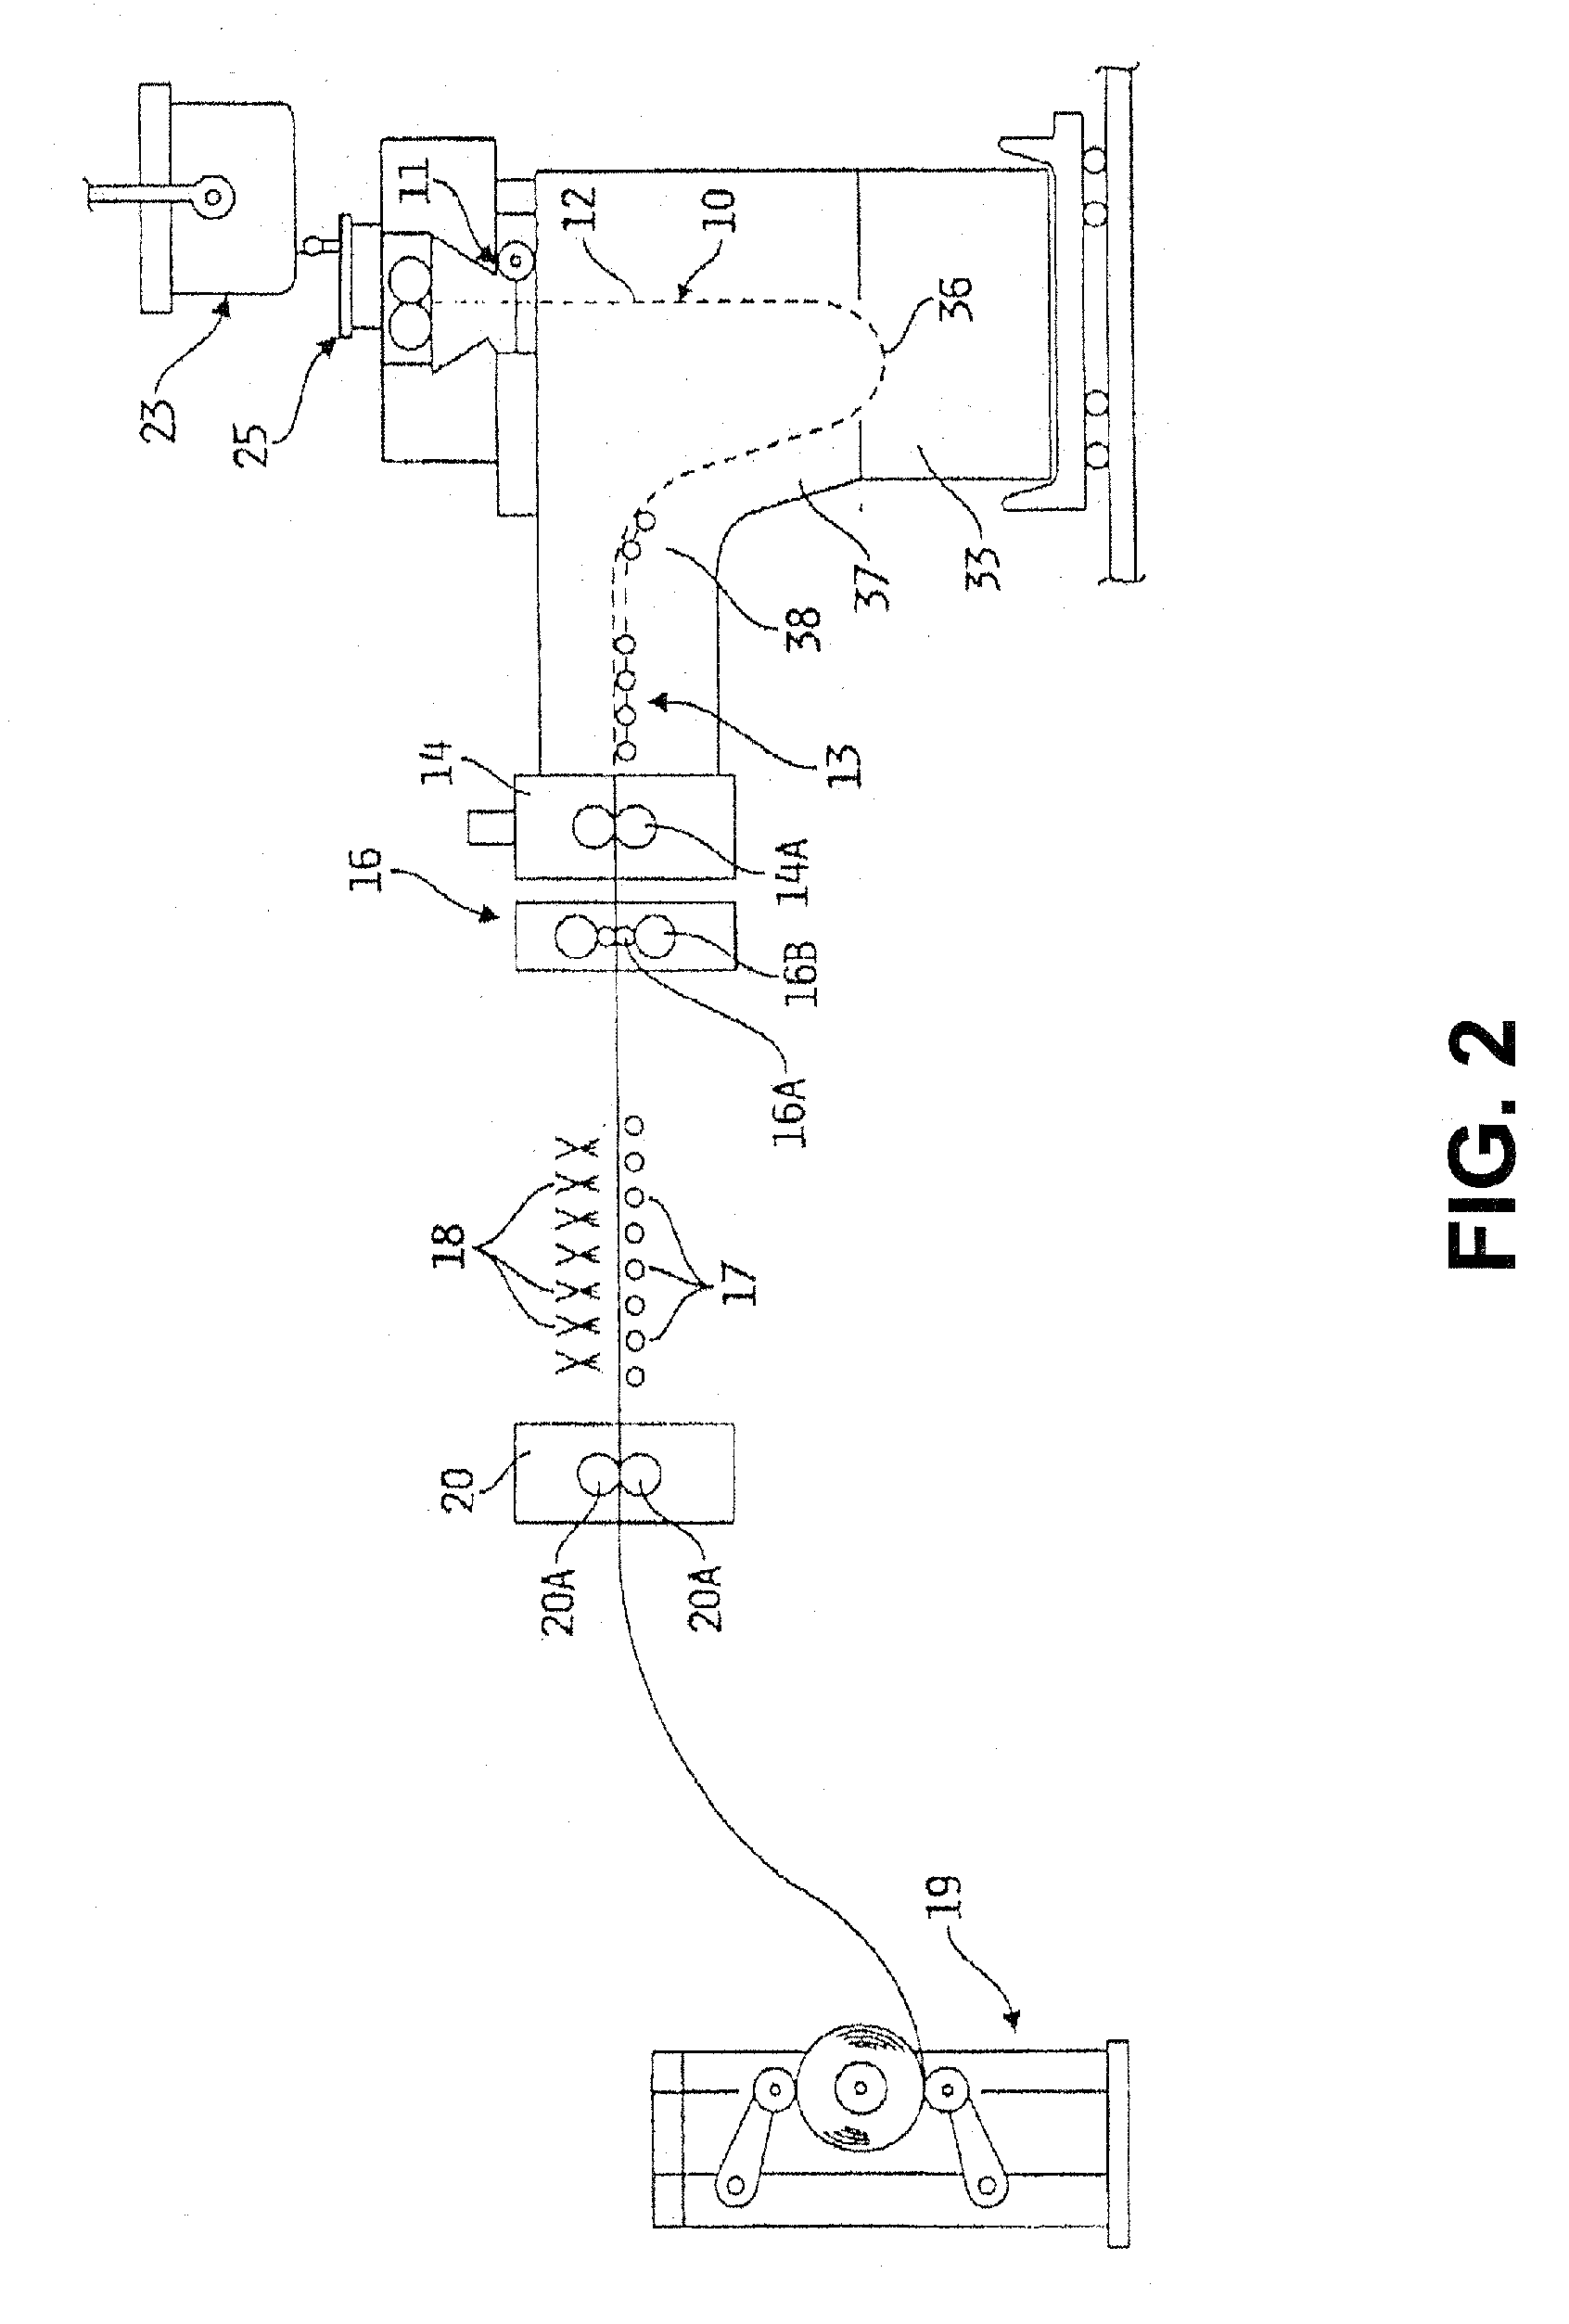 Thin cast strip with controlled manganese and low oxygen levels and method for making same